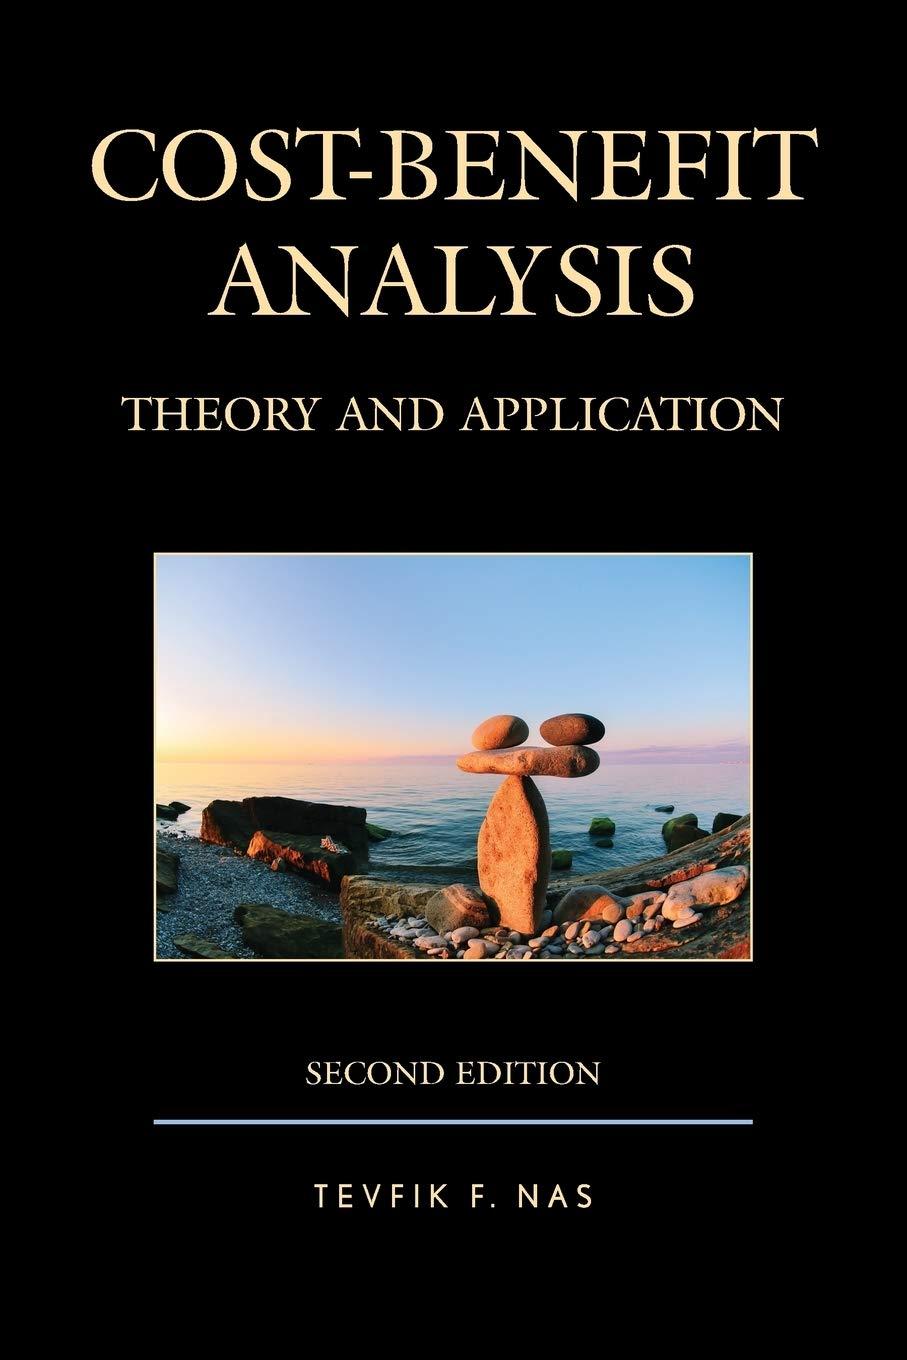 cost benefit analysis theory and application 2nd edition tevfik f. nas 1498522521, 9781498522526